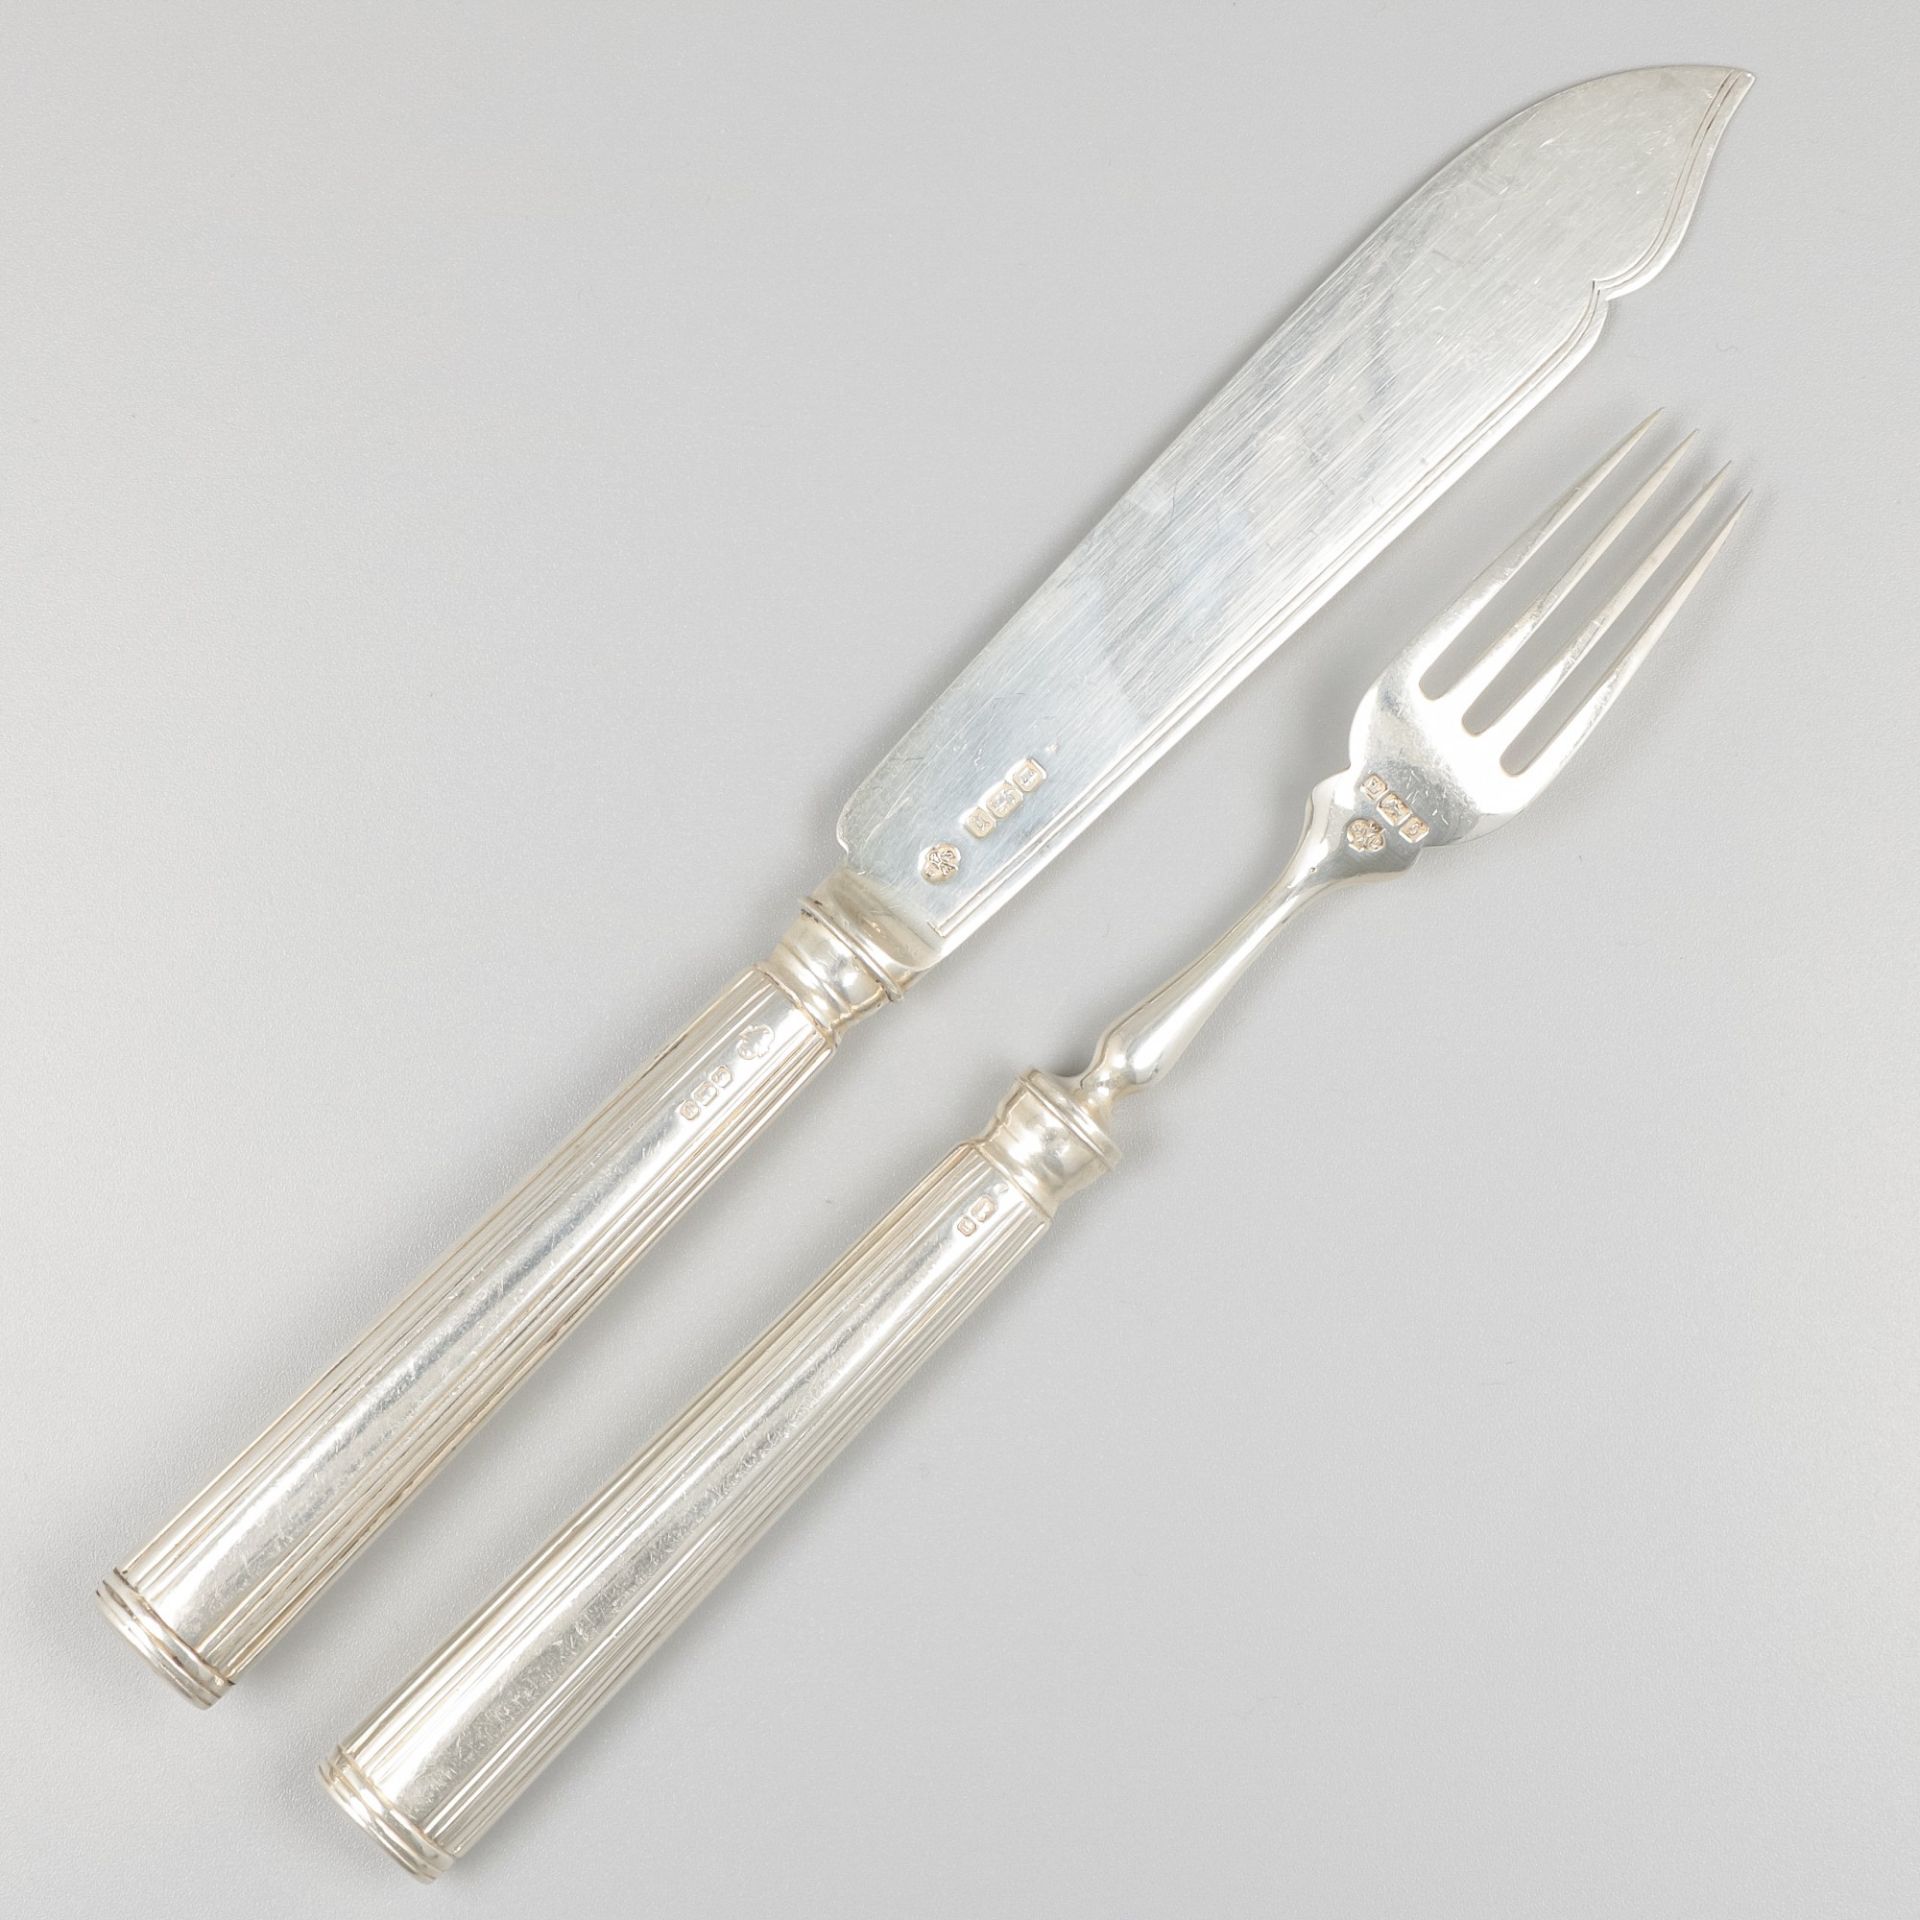 24-piece set fish cutlery, silver. - Image 8 of 9